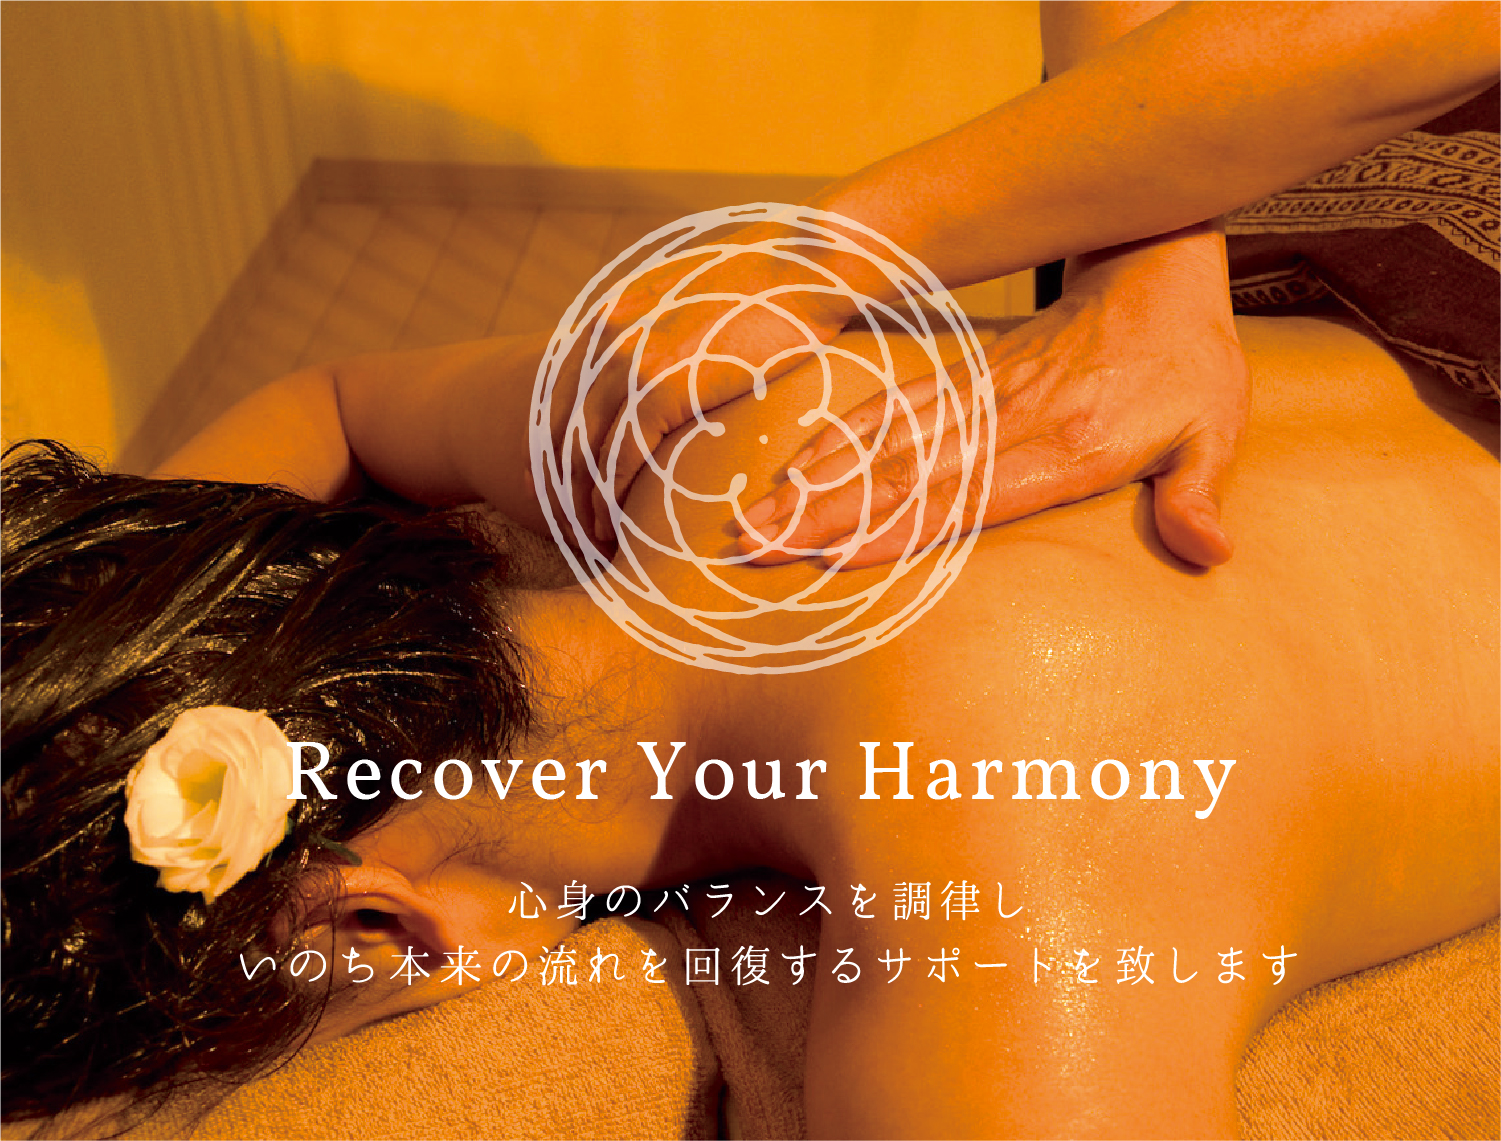 Recover Your Harmony